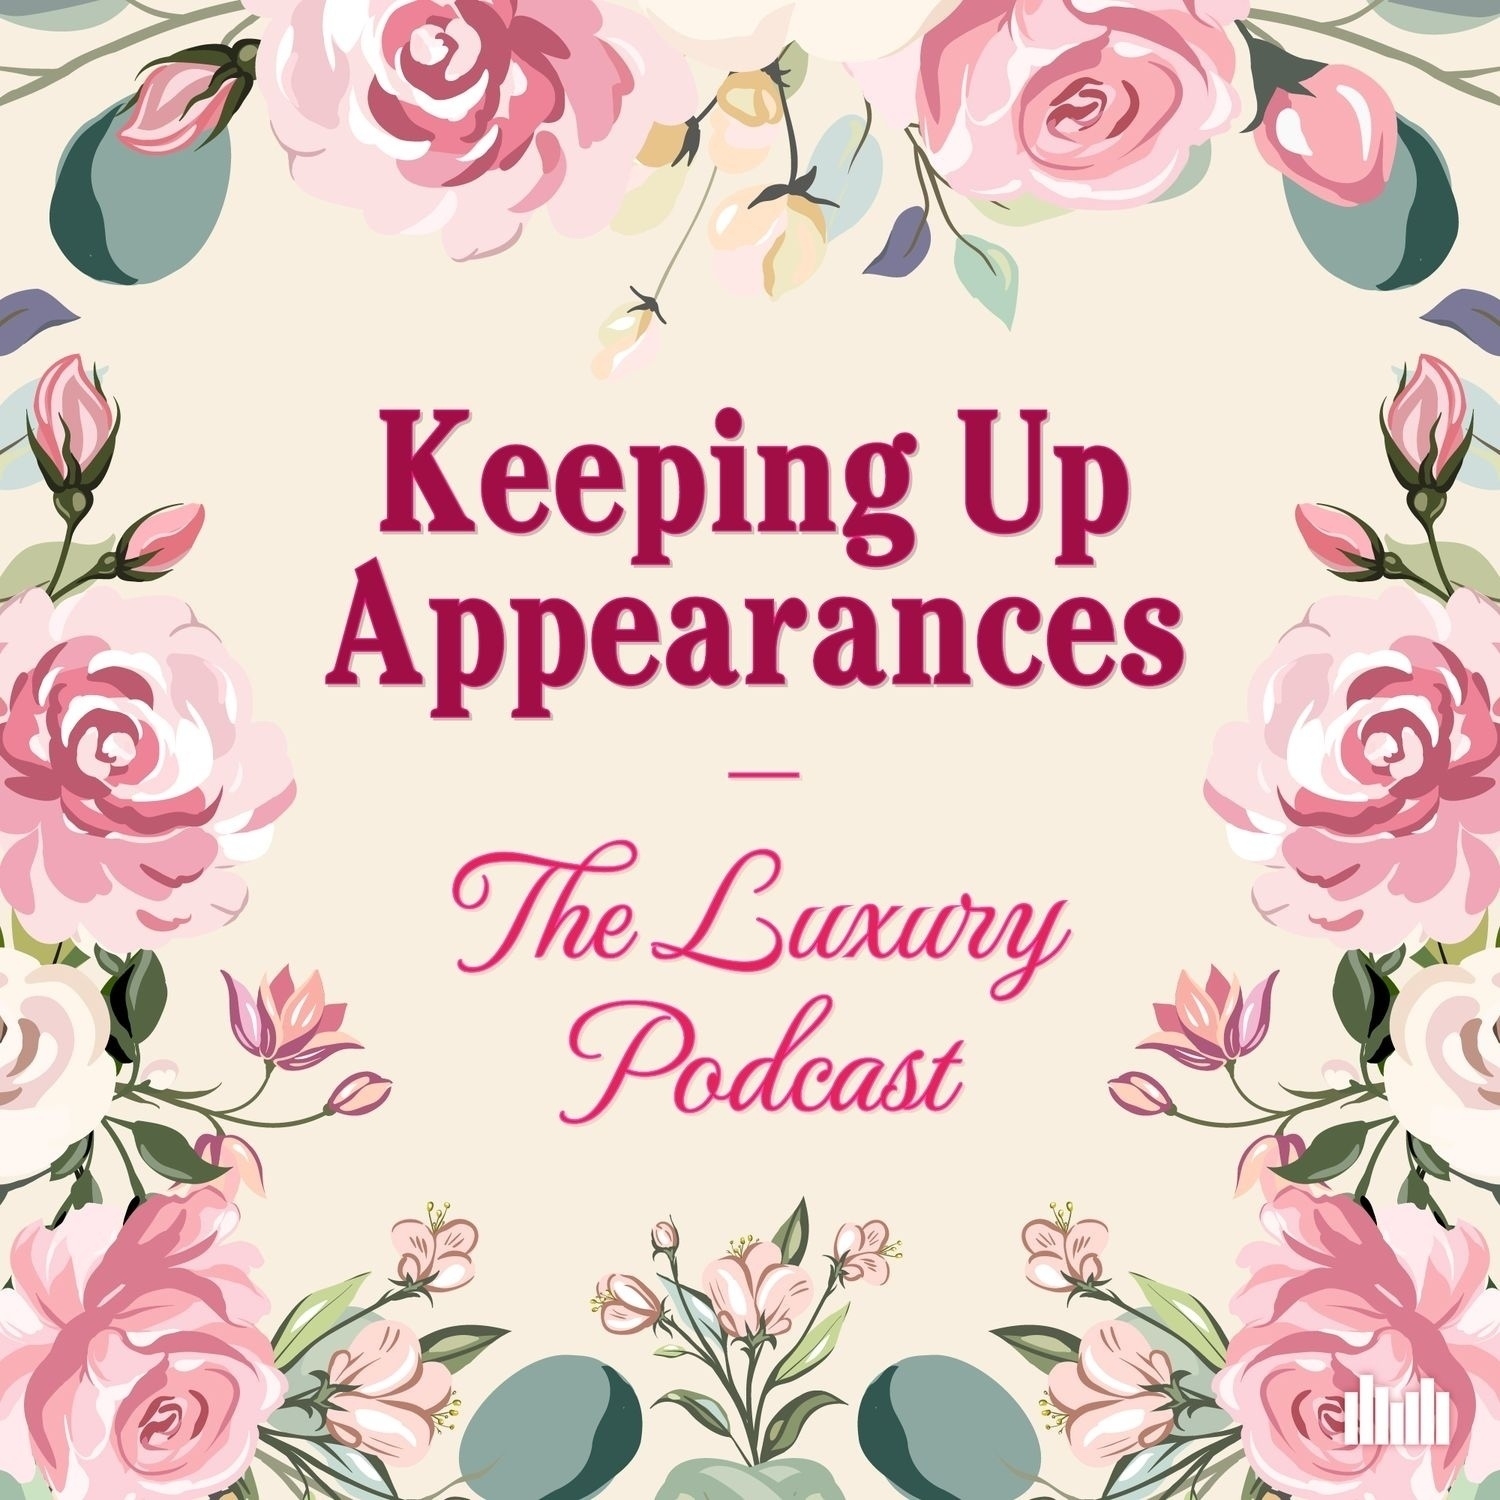 The artwork for “Keeping Up Appearances: The Luxury Podcast”